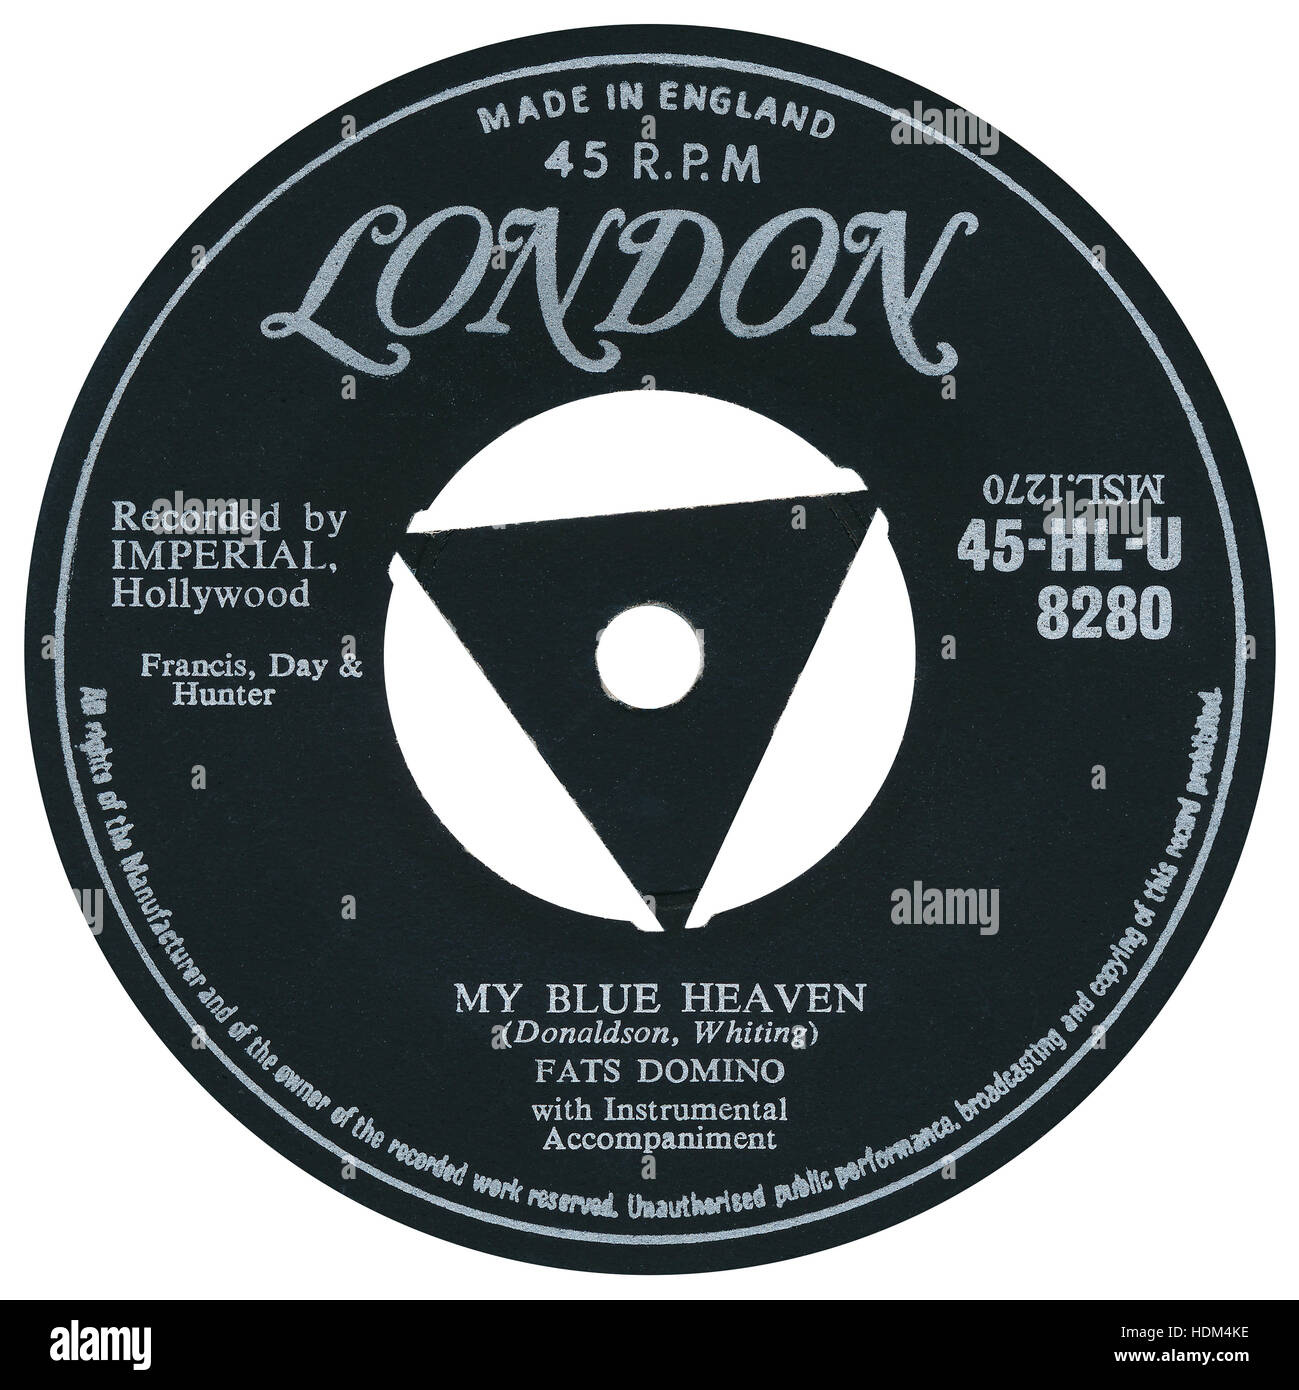 45 RPM 7' UK record label of My Blue Heaven by Fats Domino on the London label from 1956 Stock Photo